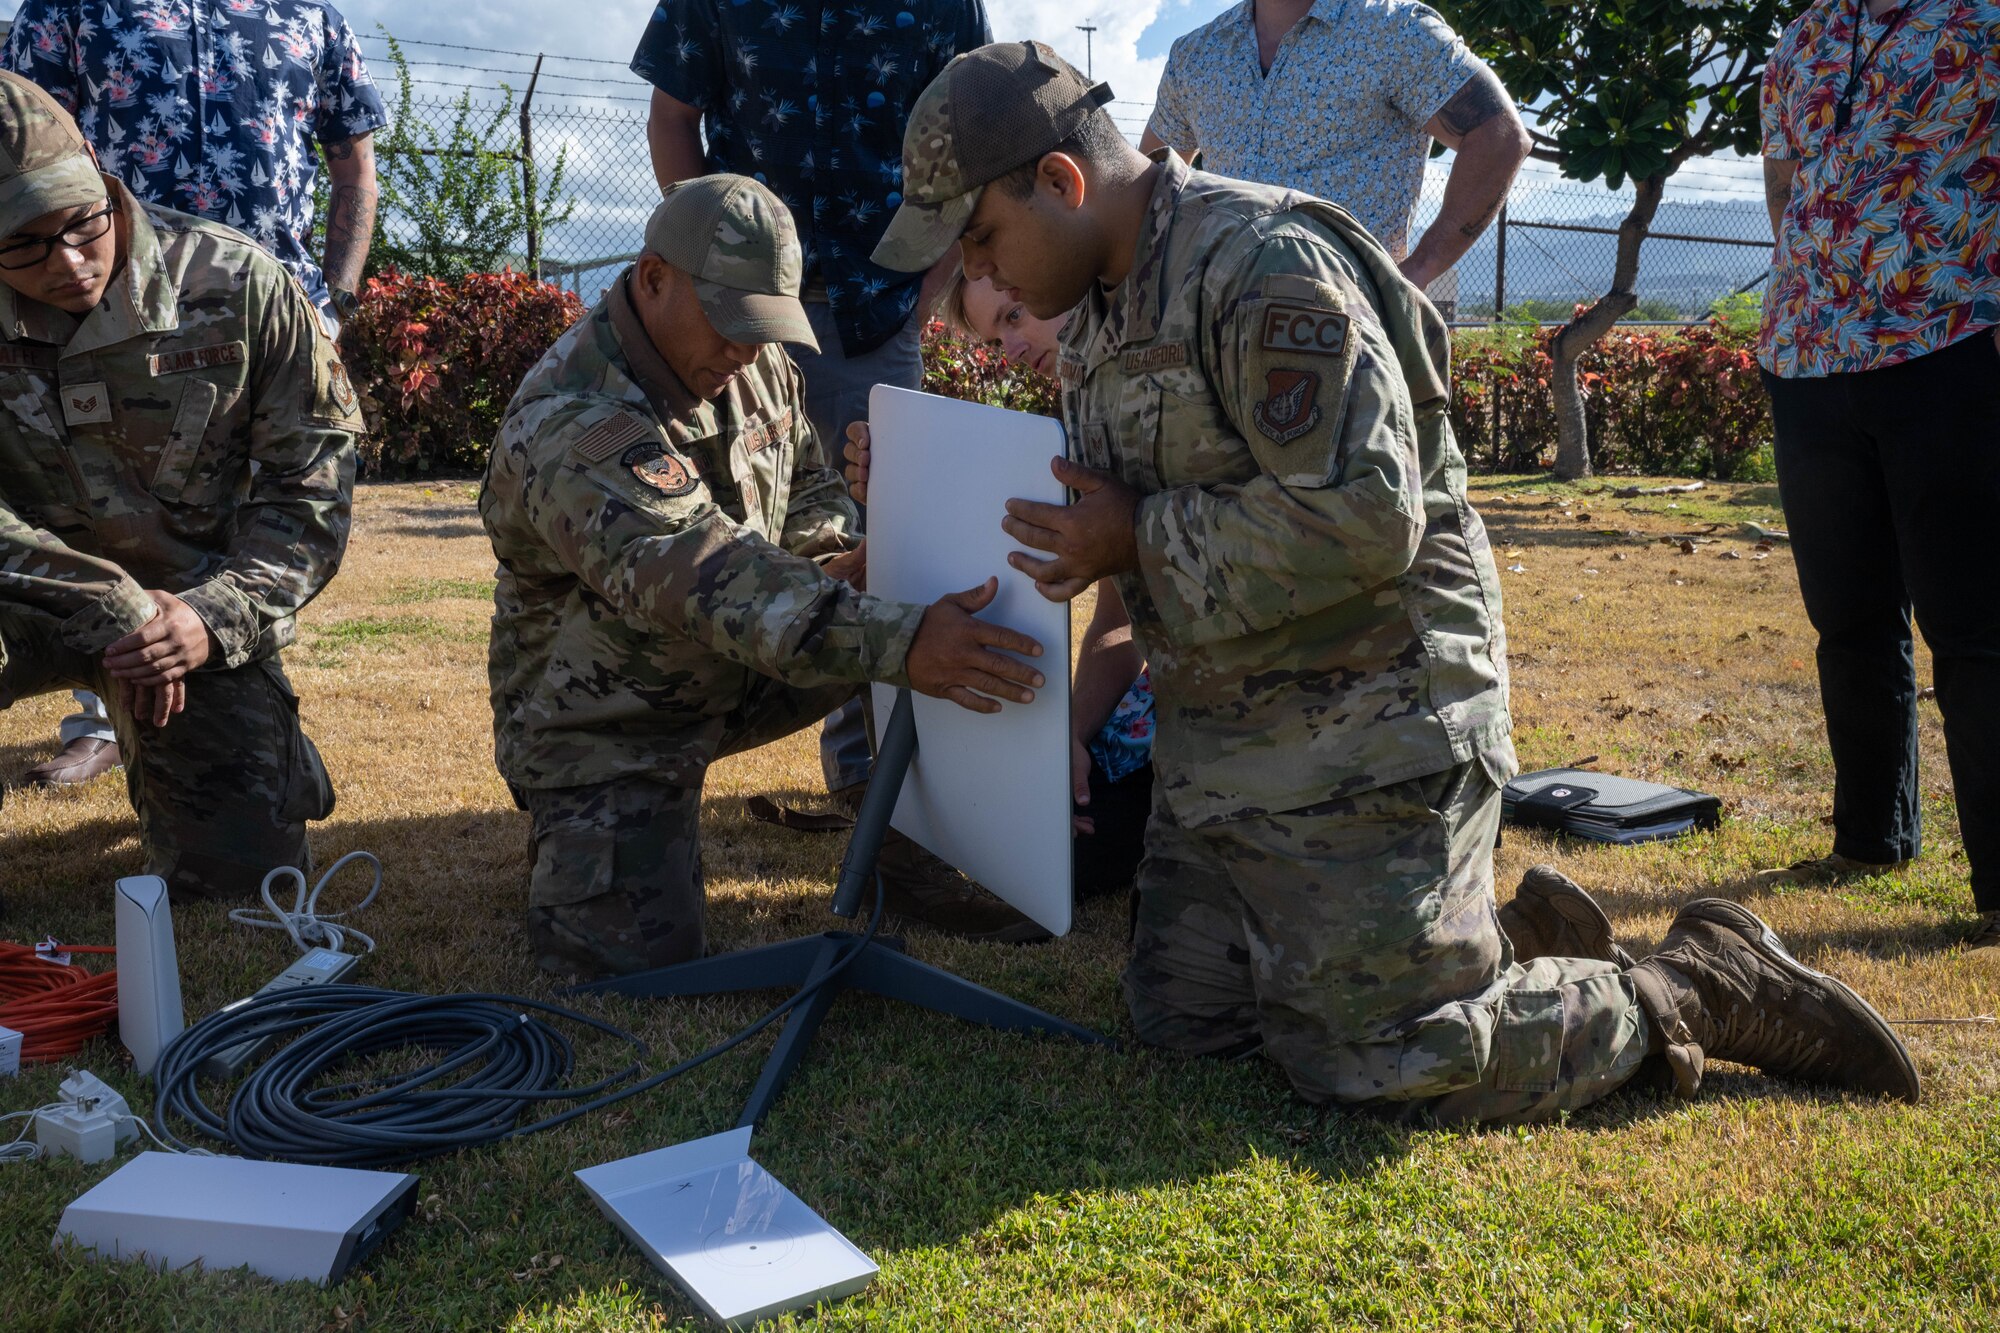 Airmen from the 15th Maintenance Squadron practice setting up a commercial satellite kit during a demonstration at Joint Base Pearl Harbor-Hickam, Hawaii, August 11, 2023. Members from the 15th MXS are in the early stages of using the commercial satellite system to improve connectivity to prepare for agile combat employment concept deployments. (U.S. Air Force photo by Senior Airman Makensie Cooper)